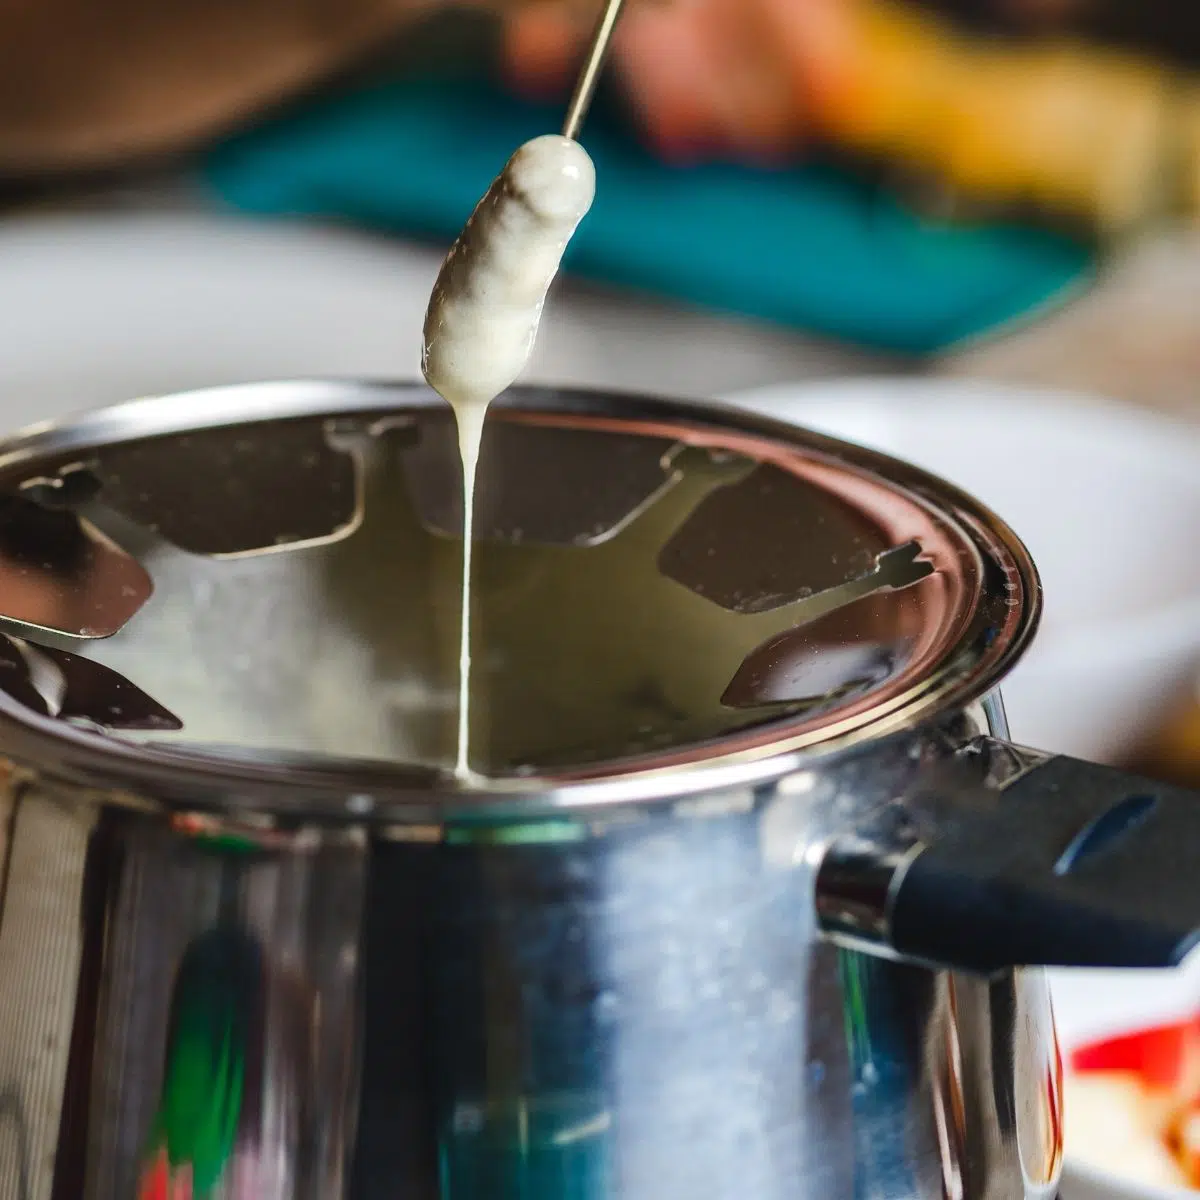 Cheese fondue pot being dipped into.